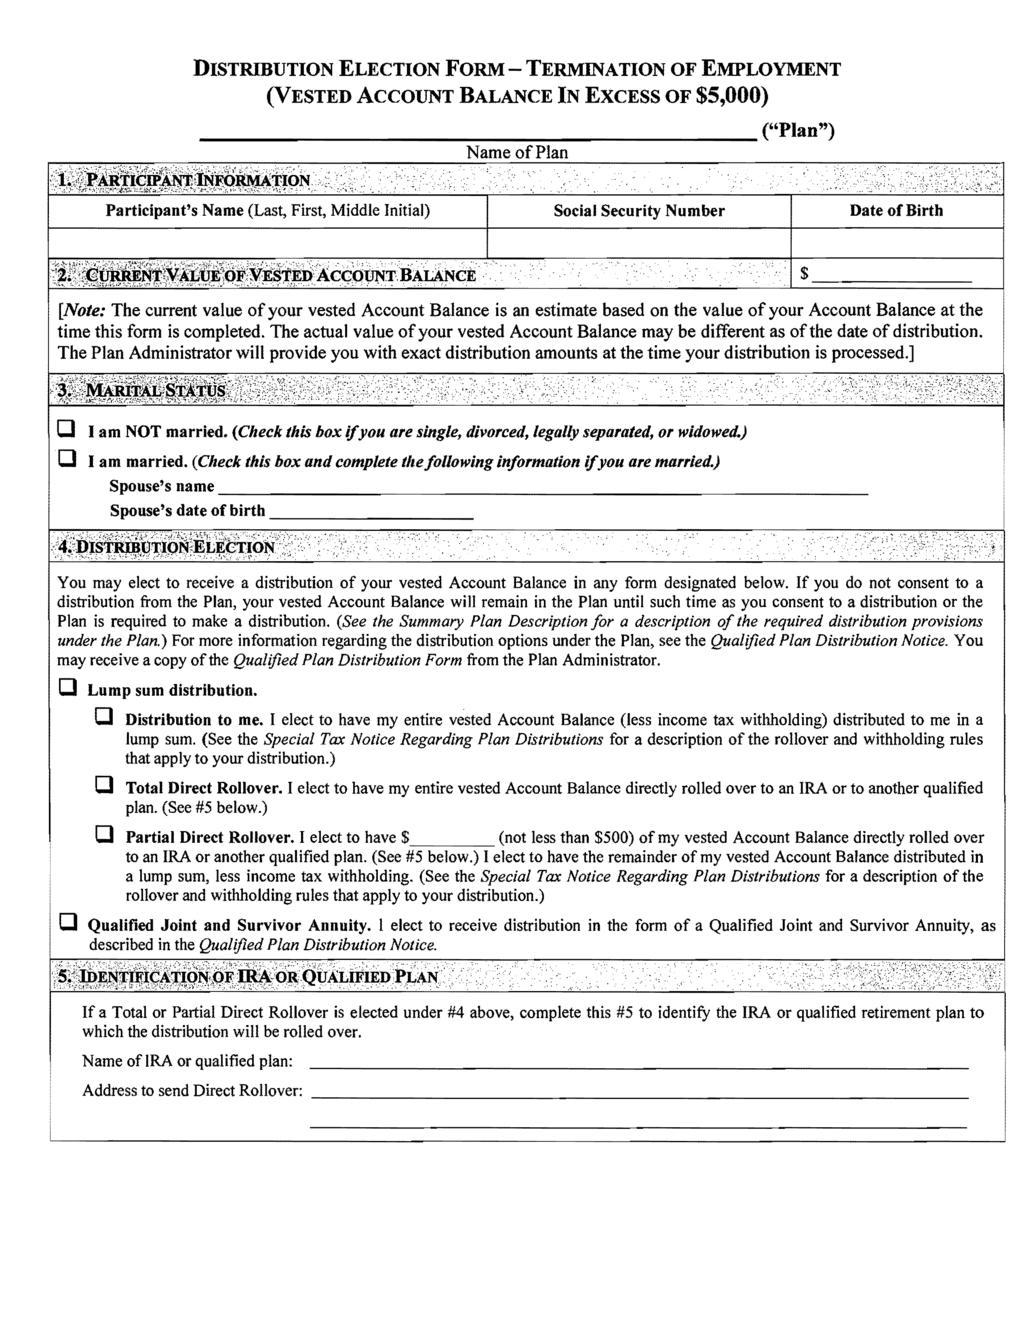 DISTRIBUTION ELECTION FORM - TERMINATION OF EMPLOYMENT (VESTED ACCOUNT BALANCE IN EXCESS OF $5,000) ("Plan") Participant's Name (Last, First, Middle Initial) Social Security Number Date of Birth o I